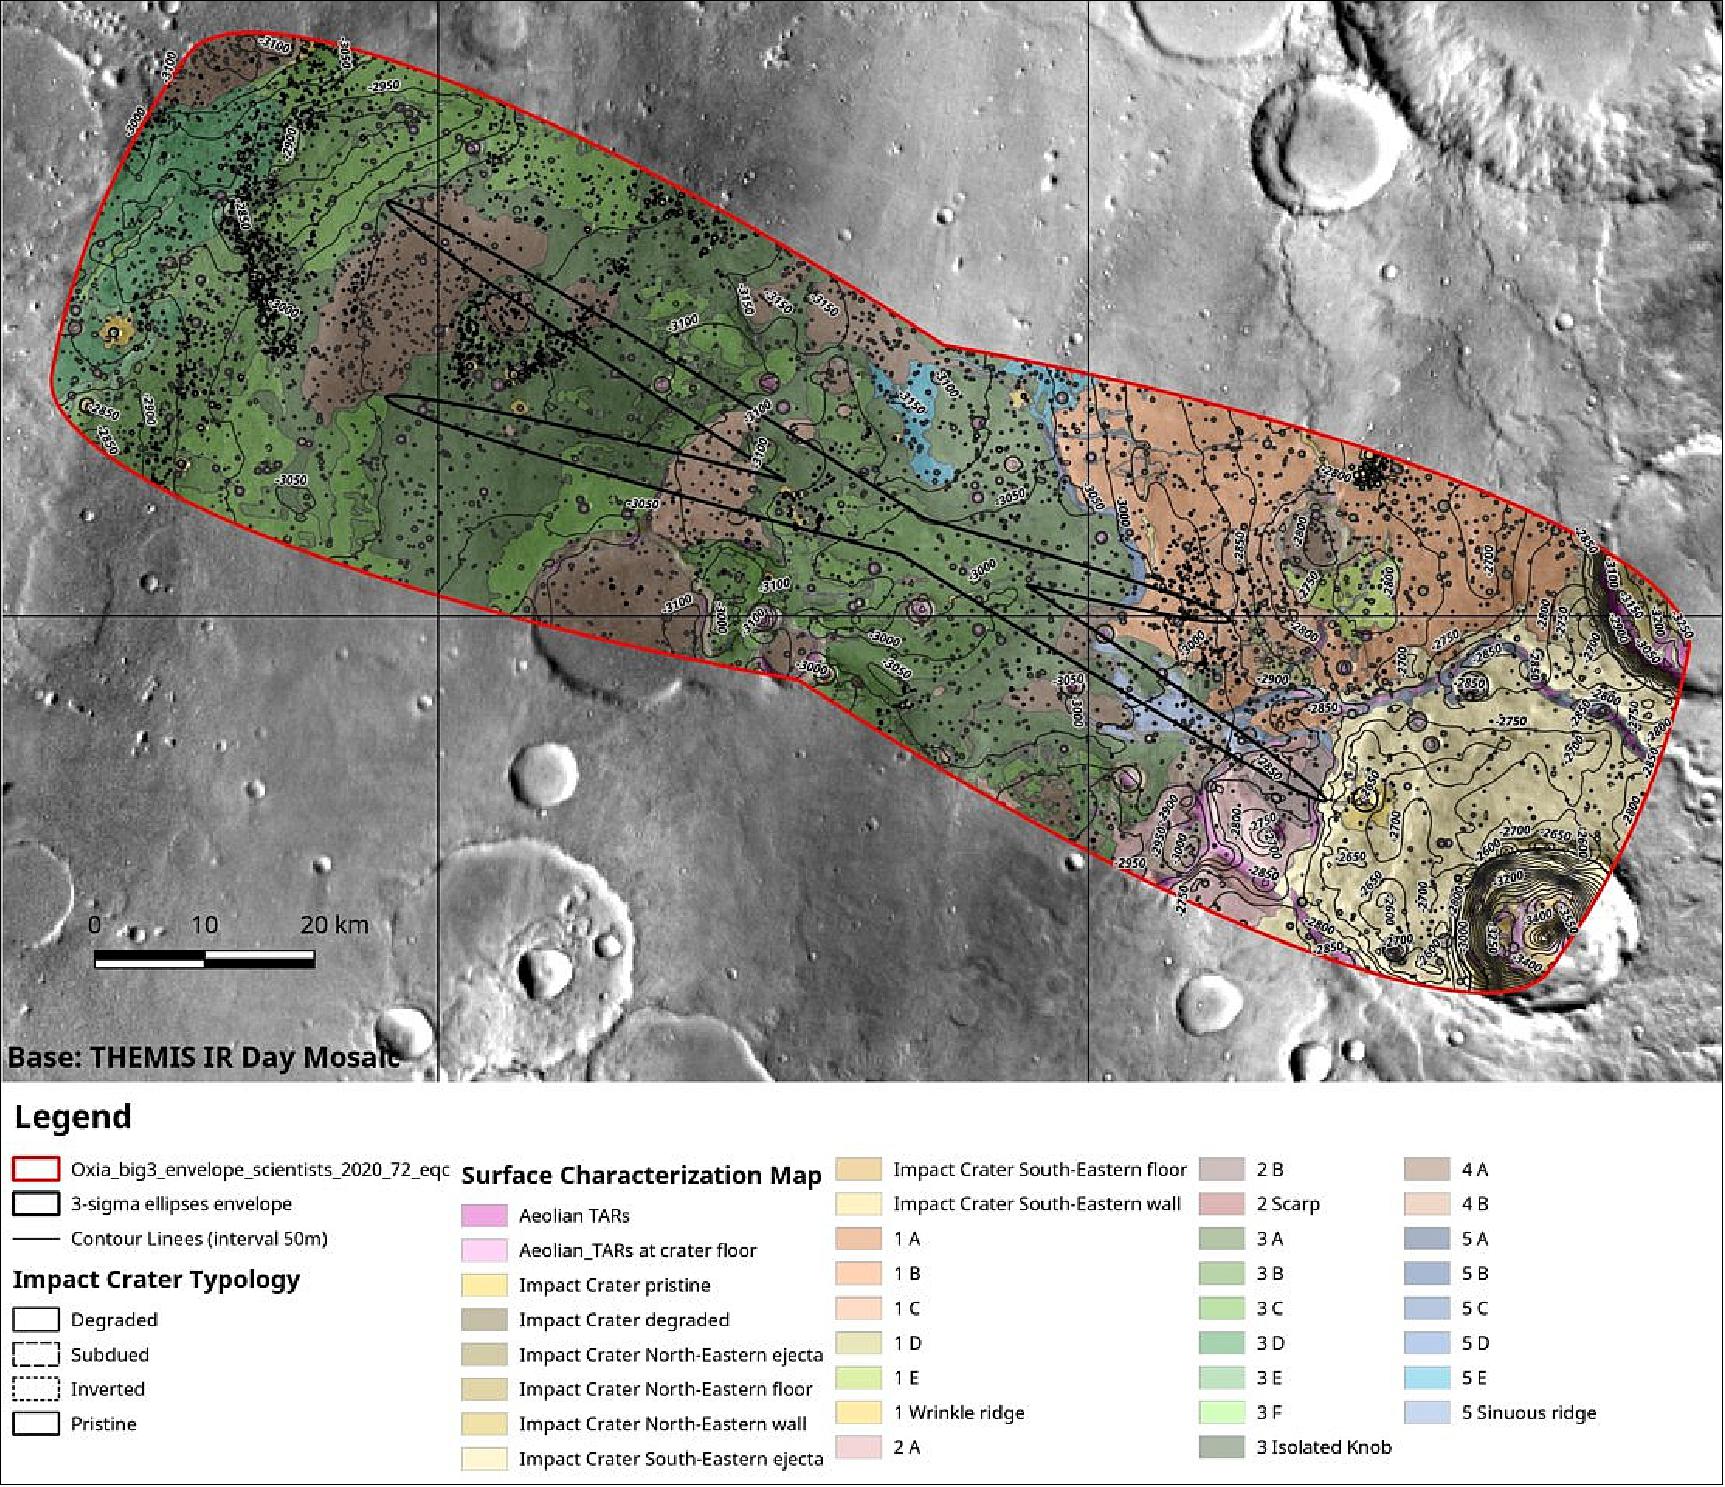 Figure 82: One example of how the Oxia Planum landing site candidate for the ExoMars 2020 mission is being analyzed. The map outlines a boundary that encapsulates the range of possible landing ellipses, with some added margin. The colors represent the variety of surface terrains identified, including plains, channels, impact craters and wind-blown features, for example. It is not a geological map intended for scientific analysis, but rather a tool used to identify different surface textures and where potential hazards may lie (image credit: IRSPS/TAS; NASA/JPL-Caltech/Arizona State University)